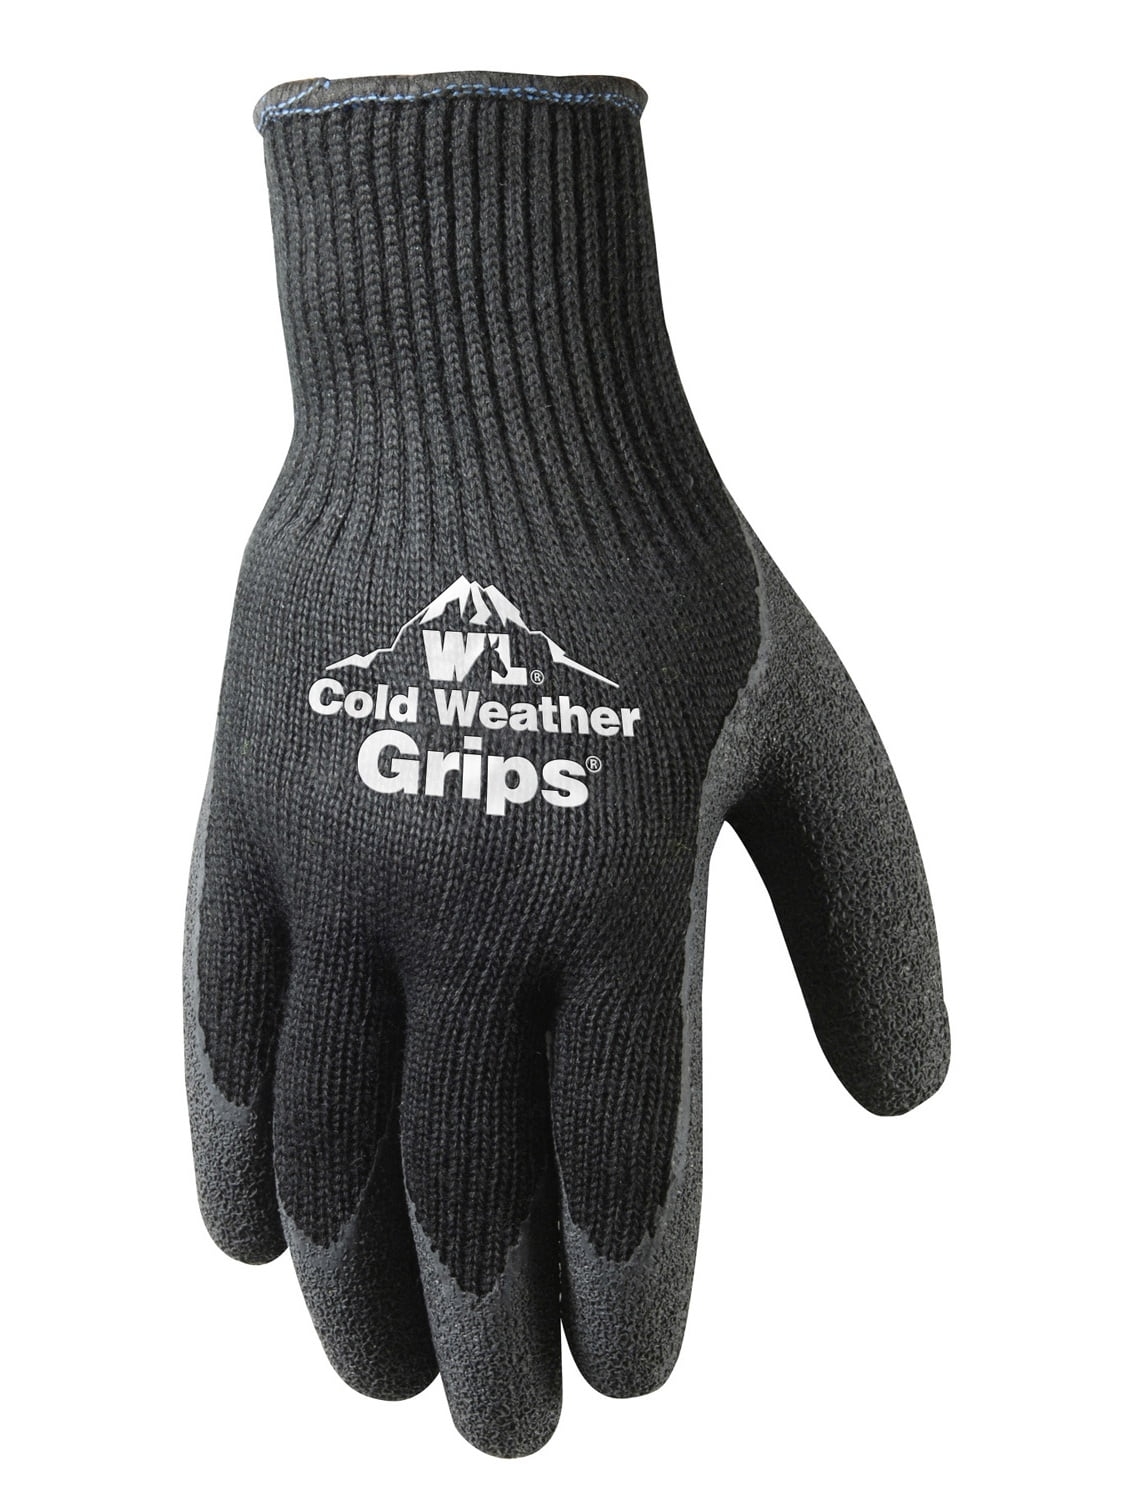 Wells Lamont 2 Pairs Cold Weather Latex Grip Winter Work Gloves (526XLN)